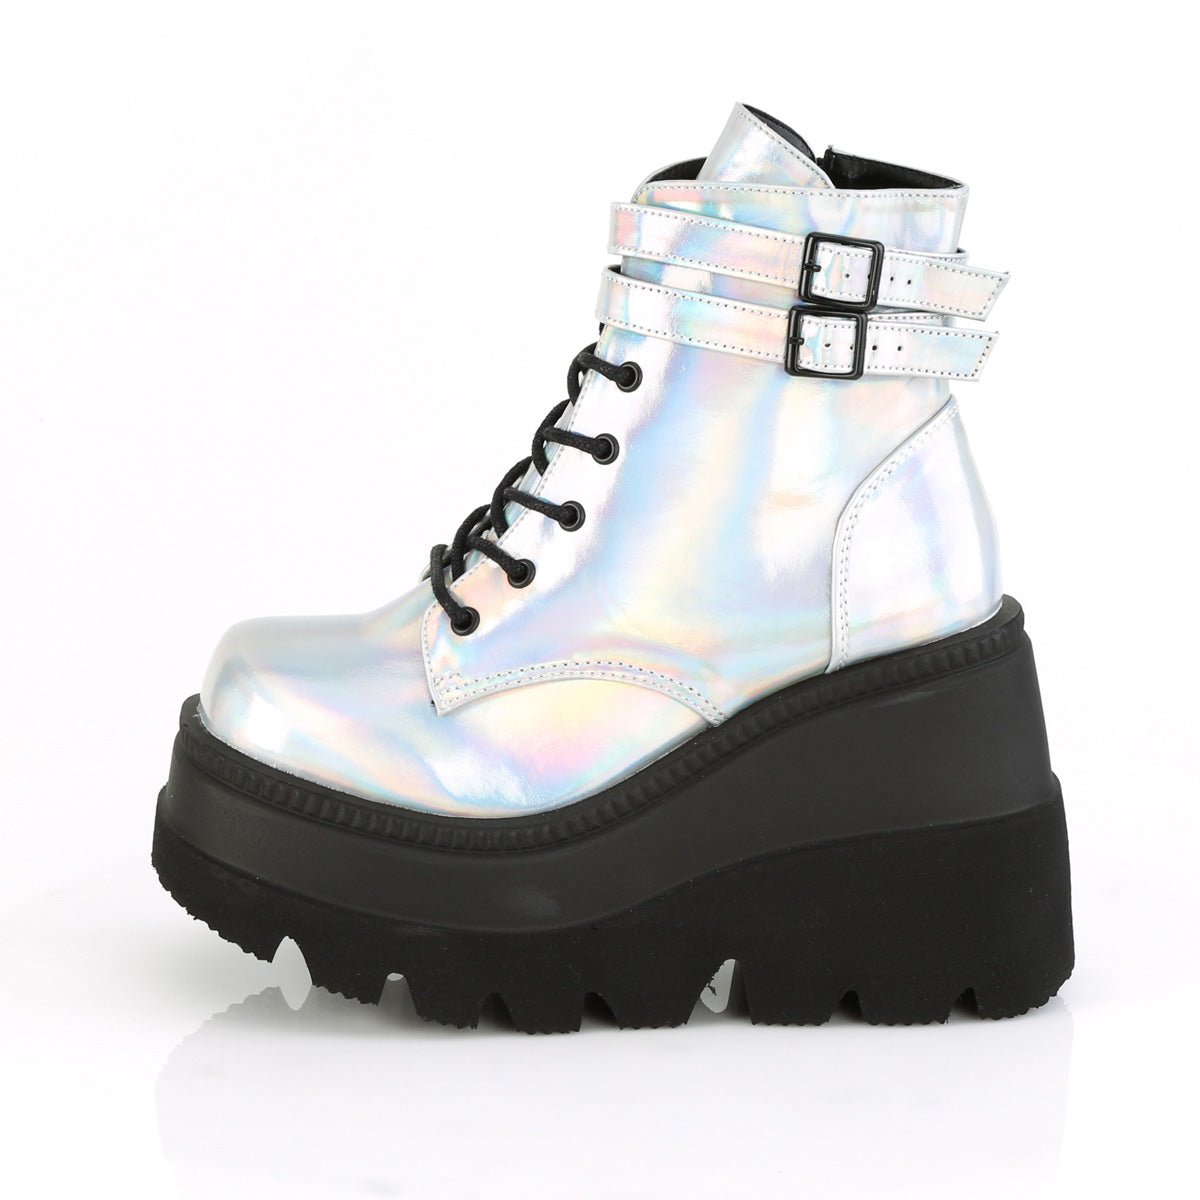 Too Fast | Demonia Shaker 52 | Silver Holographic Vegan Leather Women's Ankle Boots